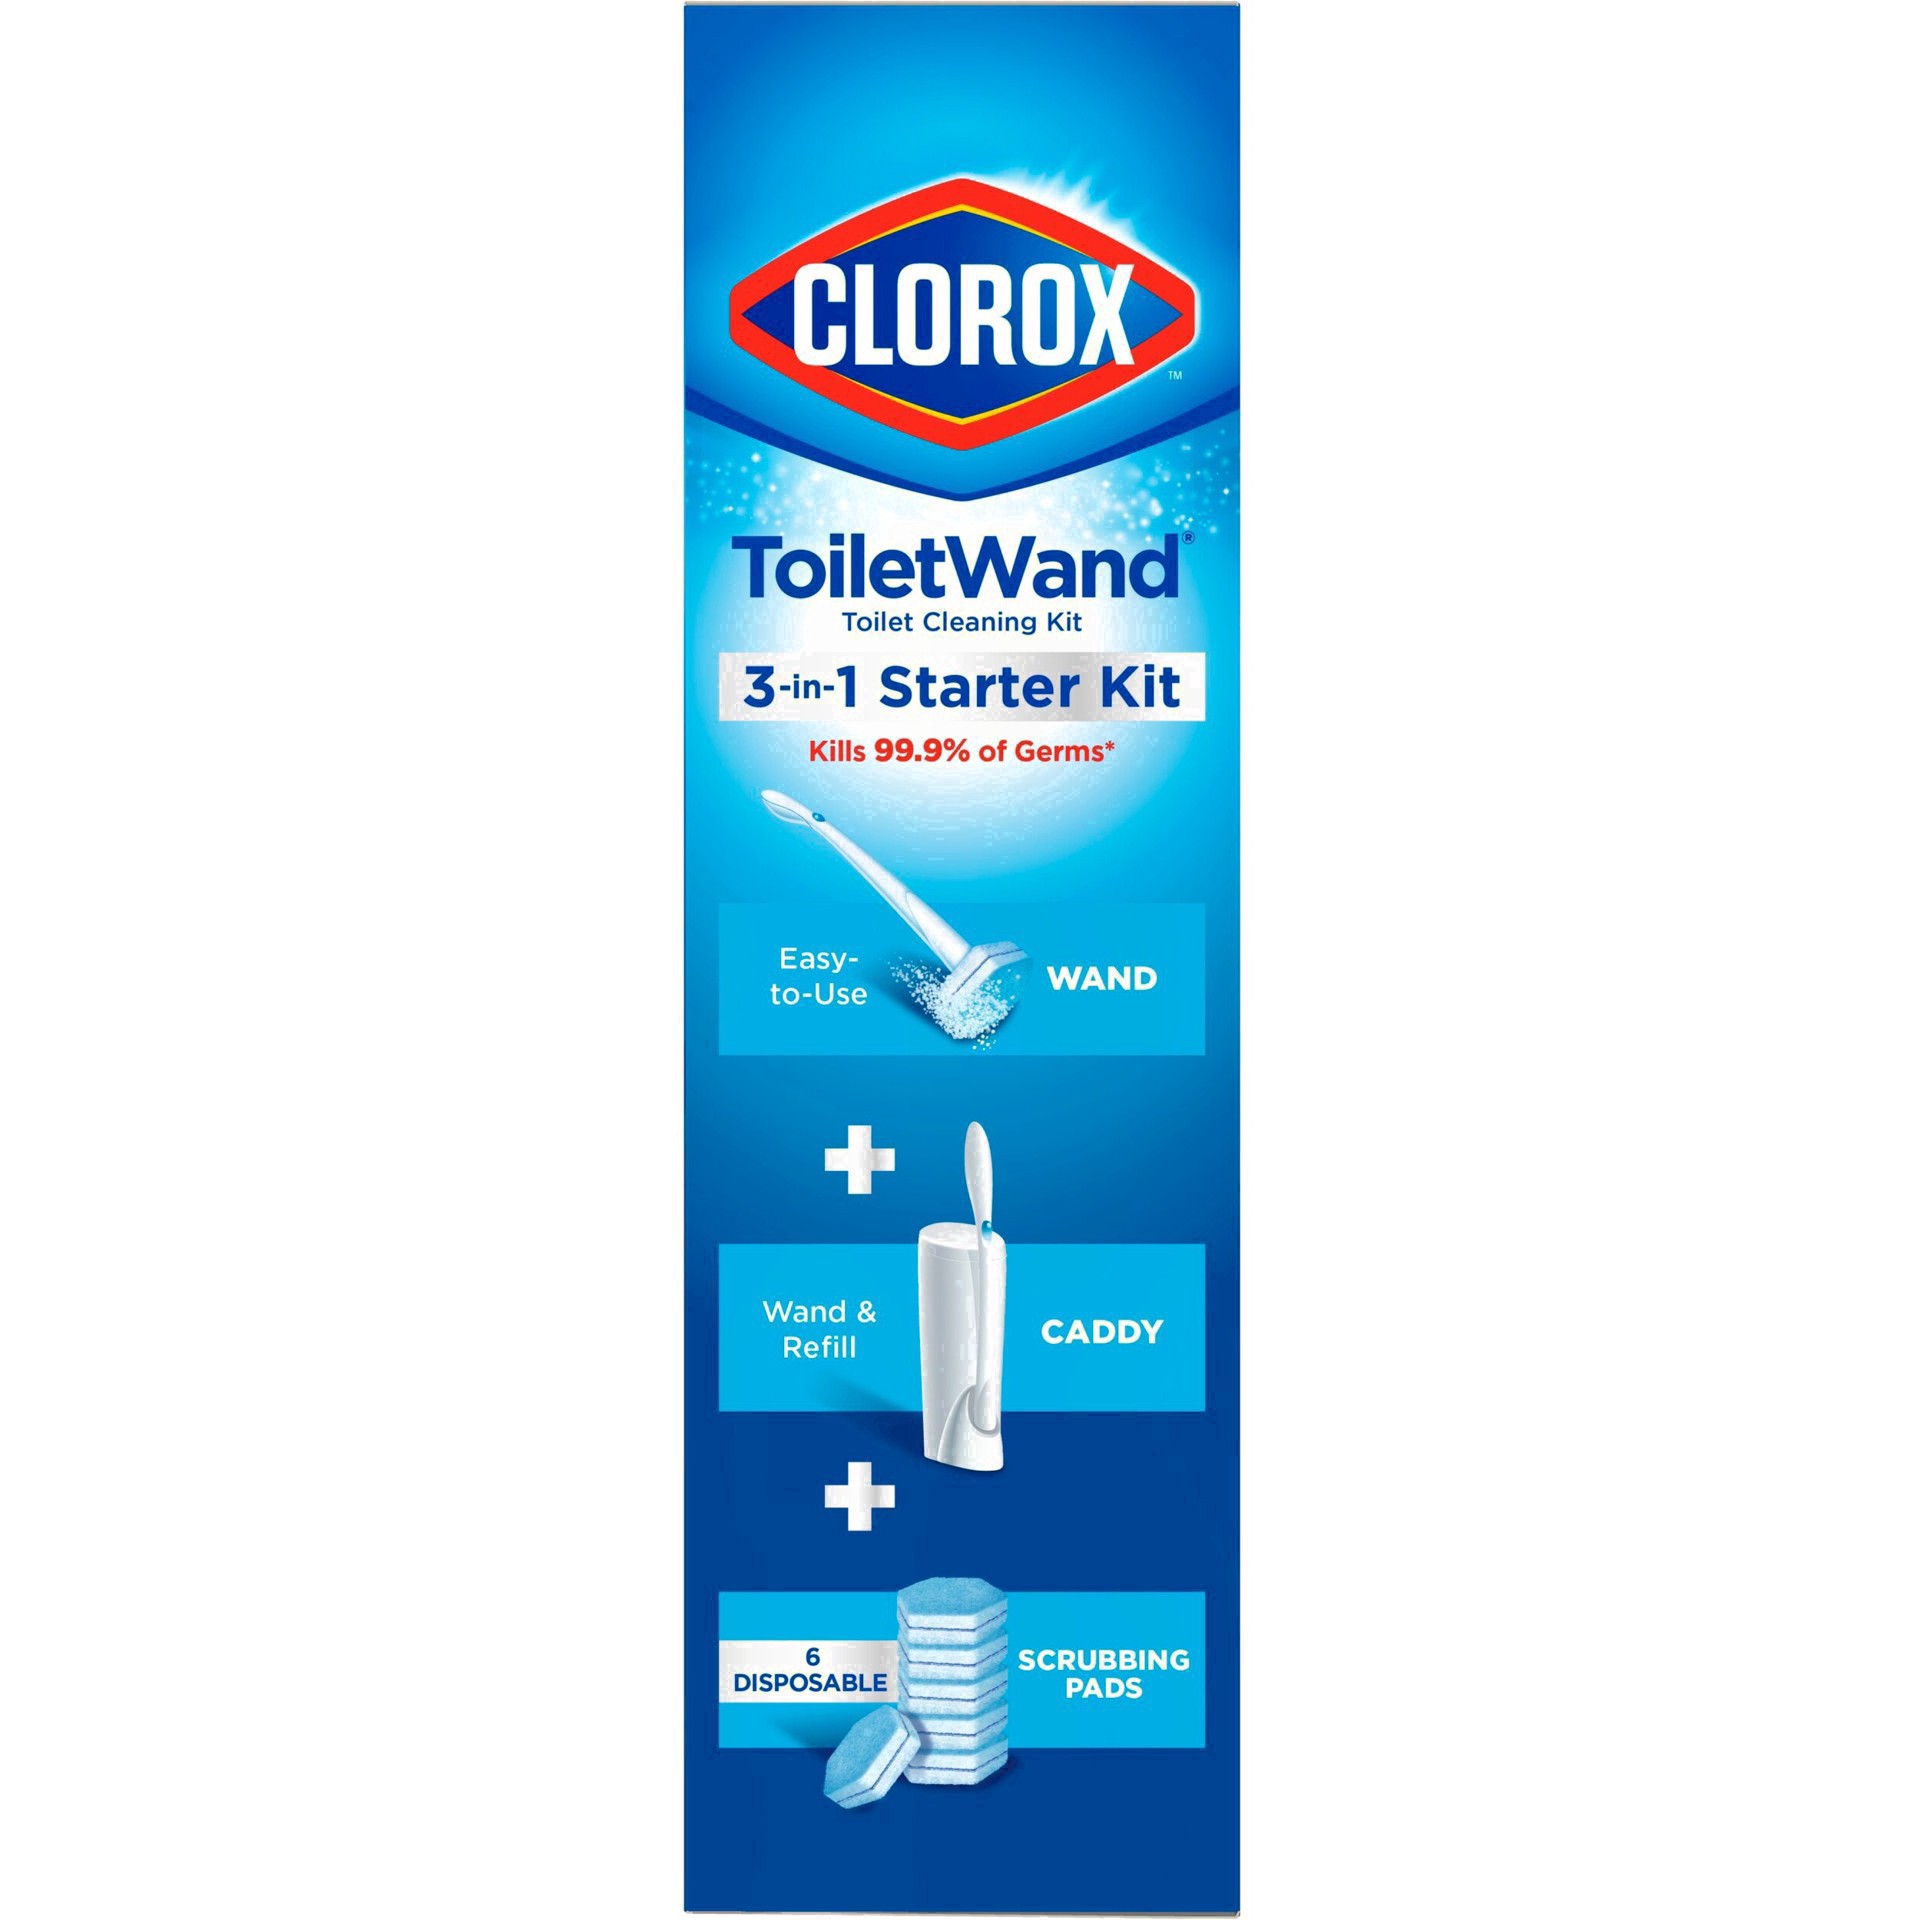 slide 43 of 176, Clorox Toilet Wand 3-in-1 Starter Toliet Cleaning Kit, 1 ct